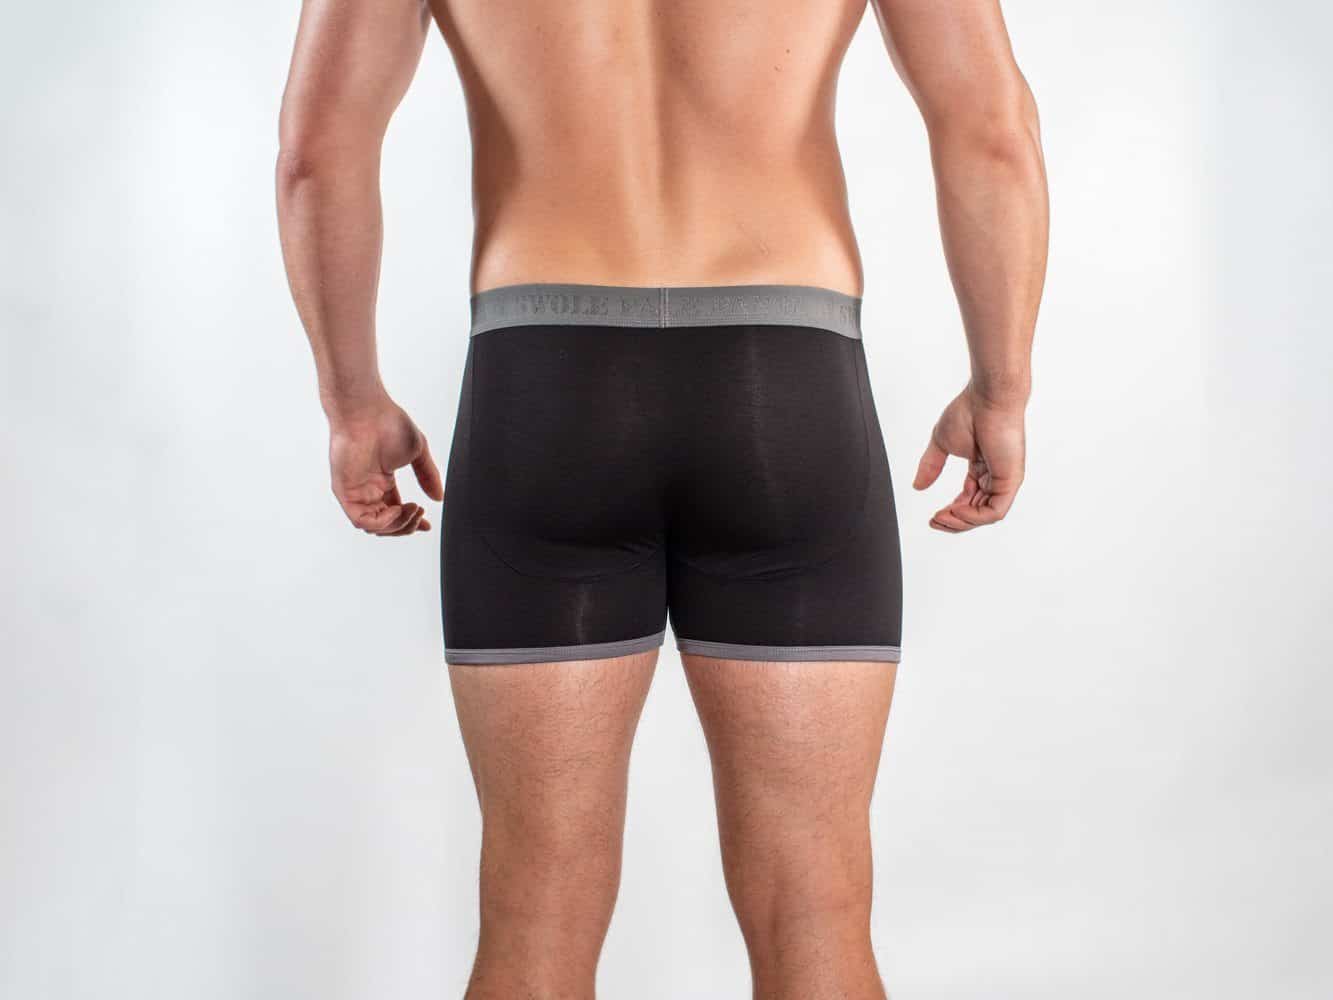 Bamboo Boxers - Black / Grey Band by Smart Clothes York Yorkshire